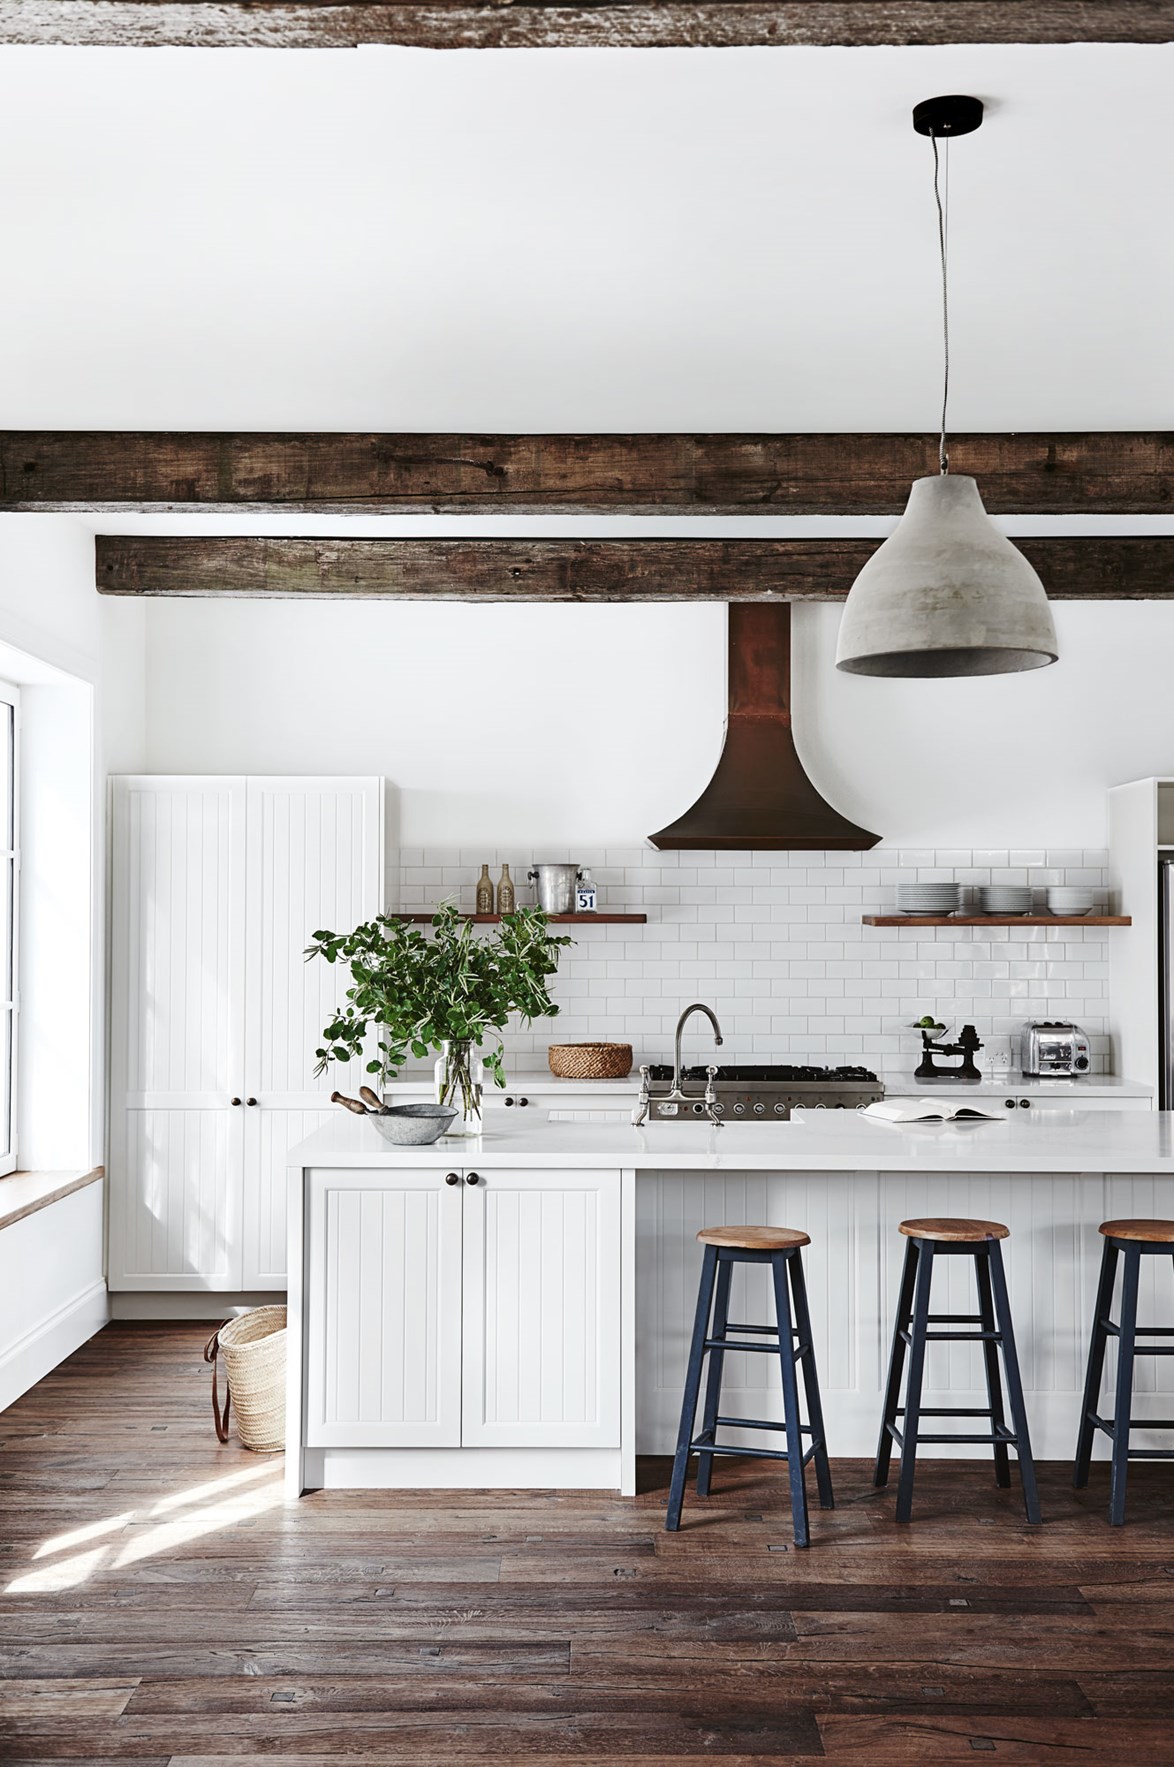 The kitchen features a copper range hood salvaged from a warehouse demolition.